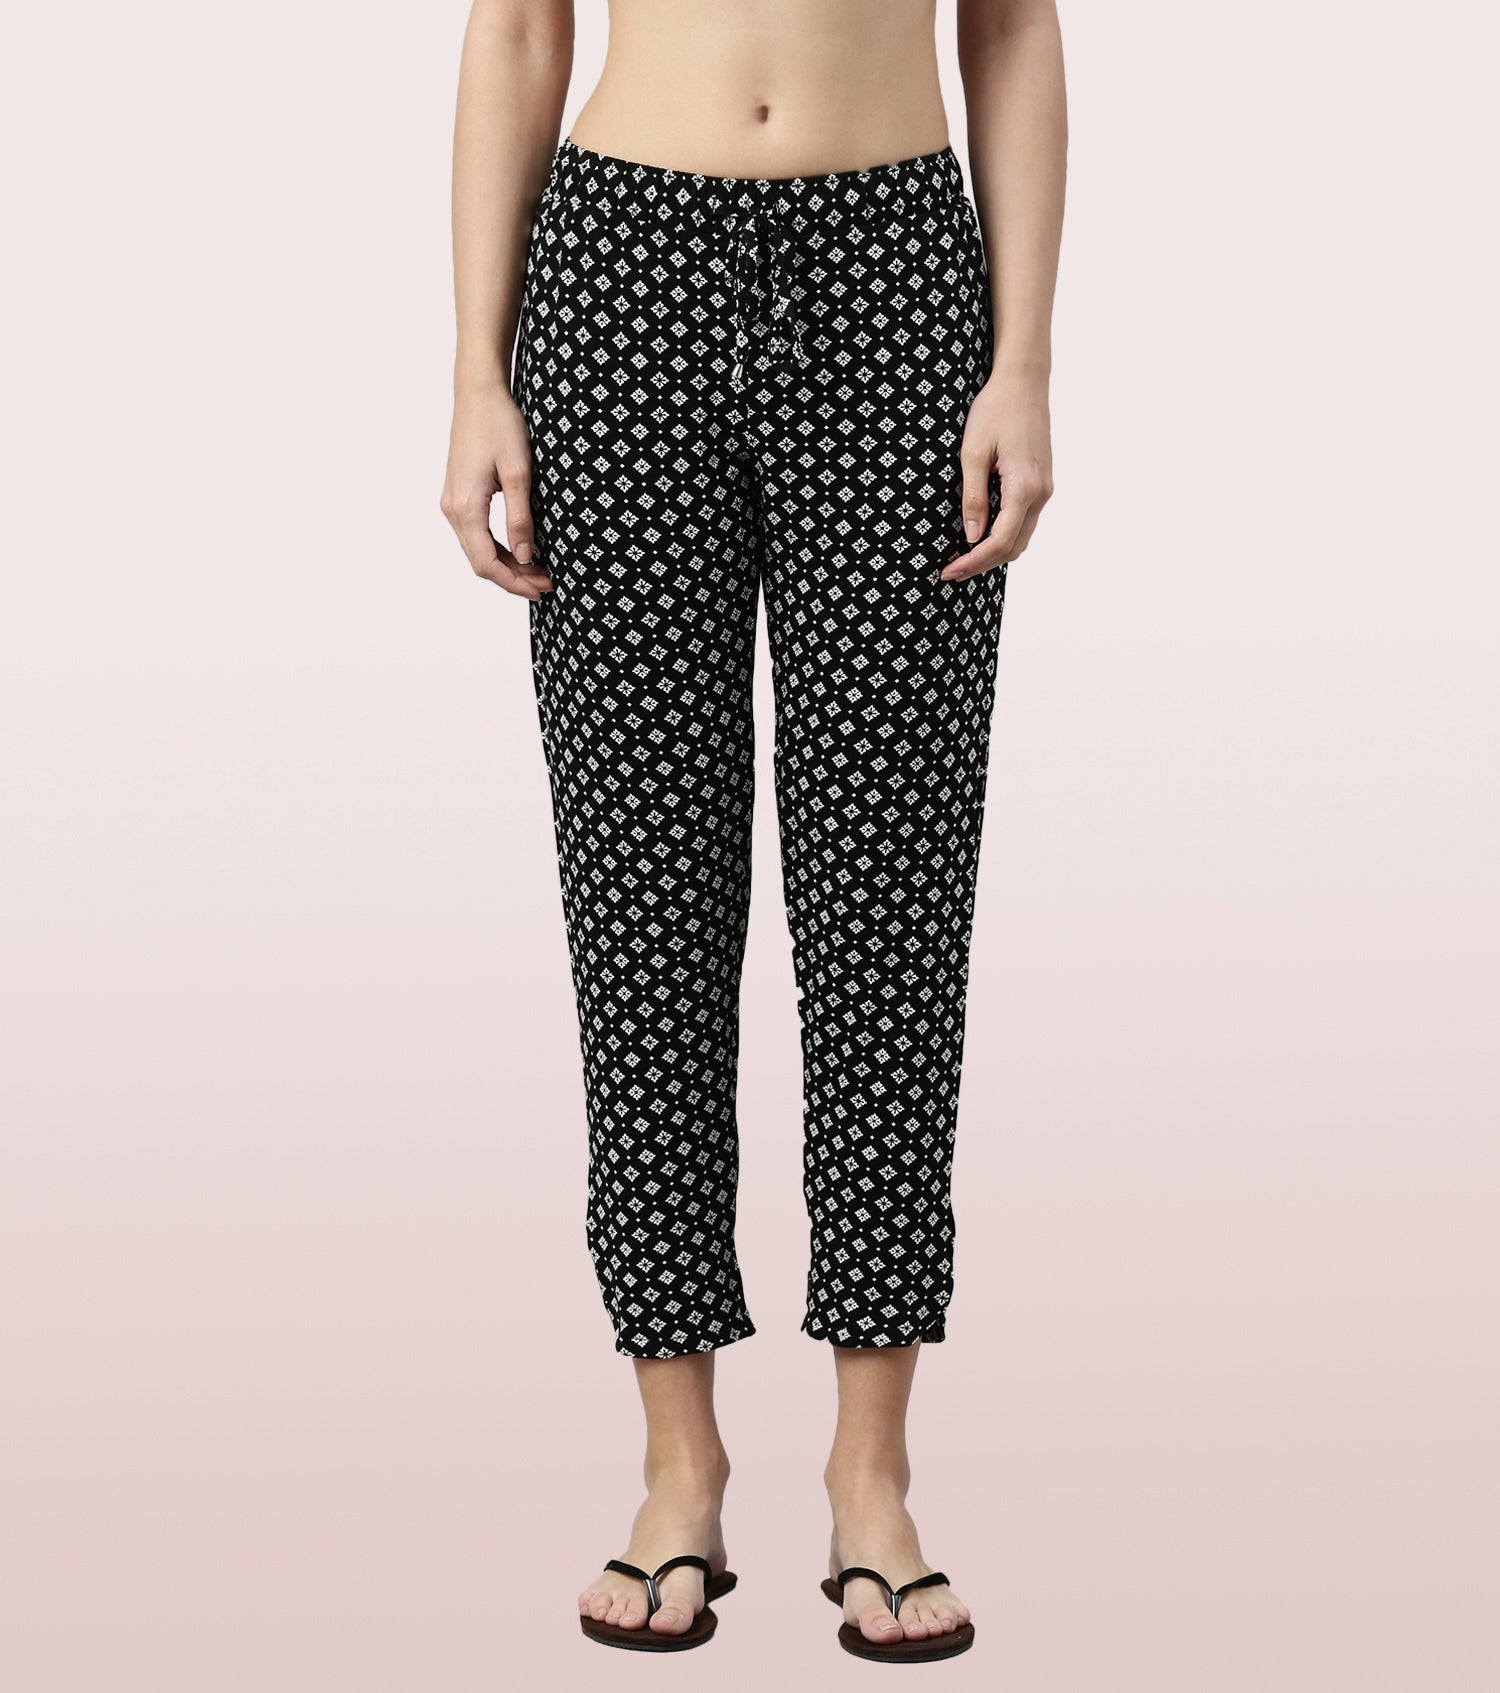 Shop-In Pants - Tapered Lounge Pants With Self Fabric Drawstring